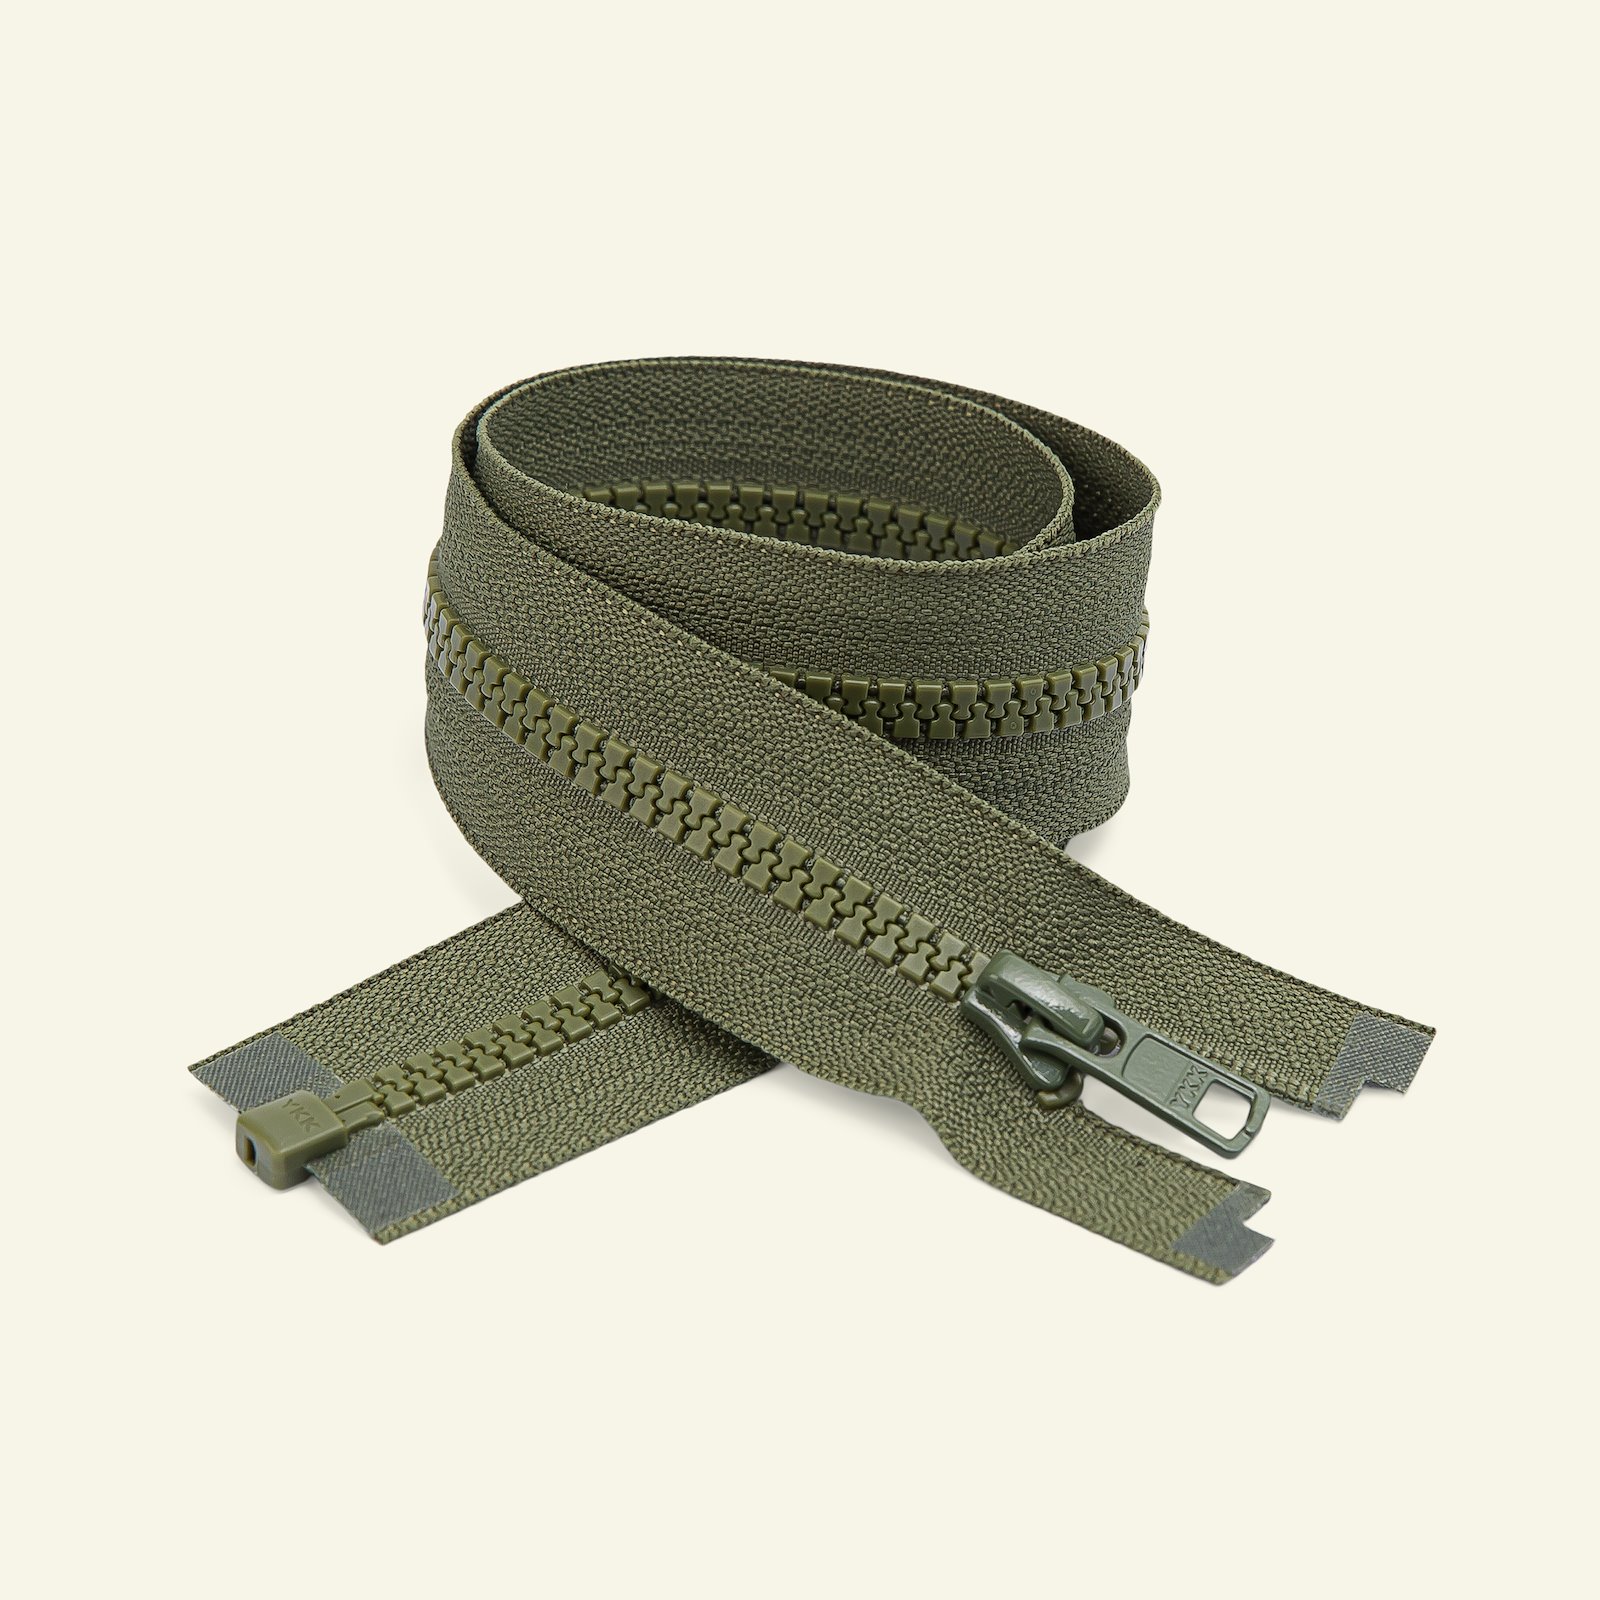 YKK zip 6mm open end 65cm army x50033_pack